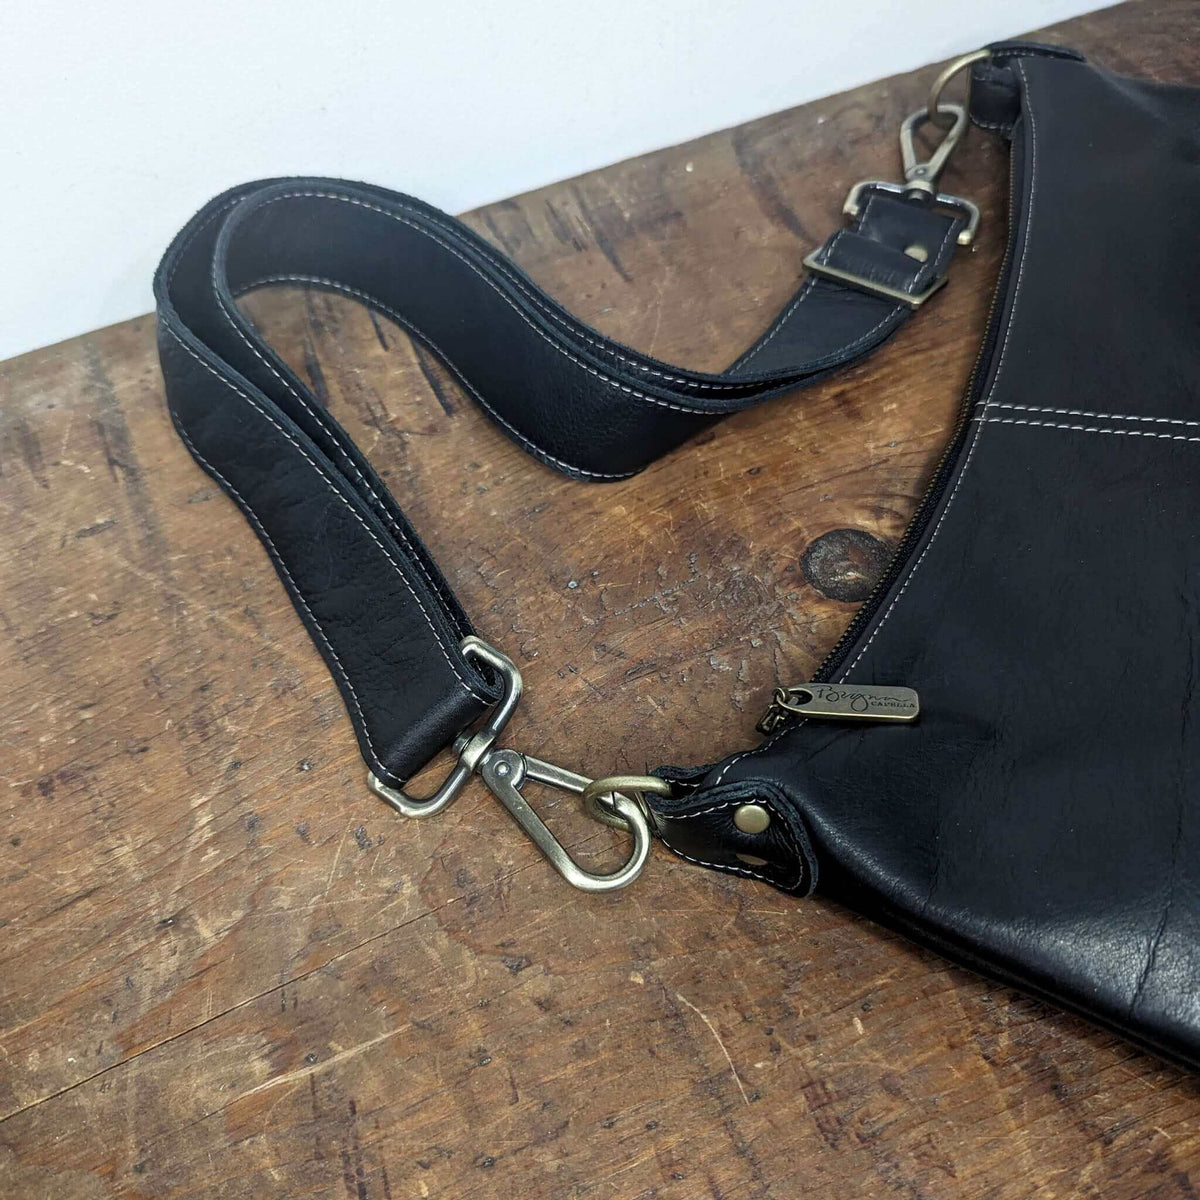 Black leather Hobo Crossbody, Brynn Capella , Aniline Leather, pull-up leather